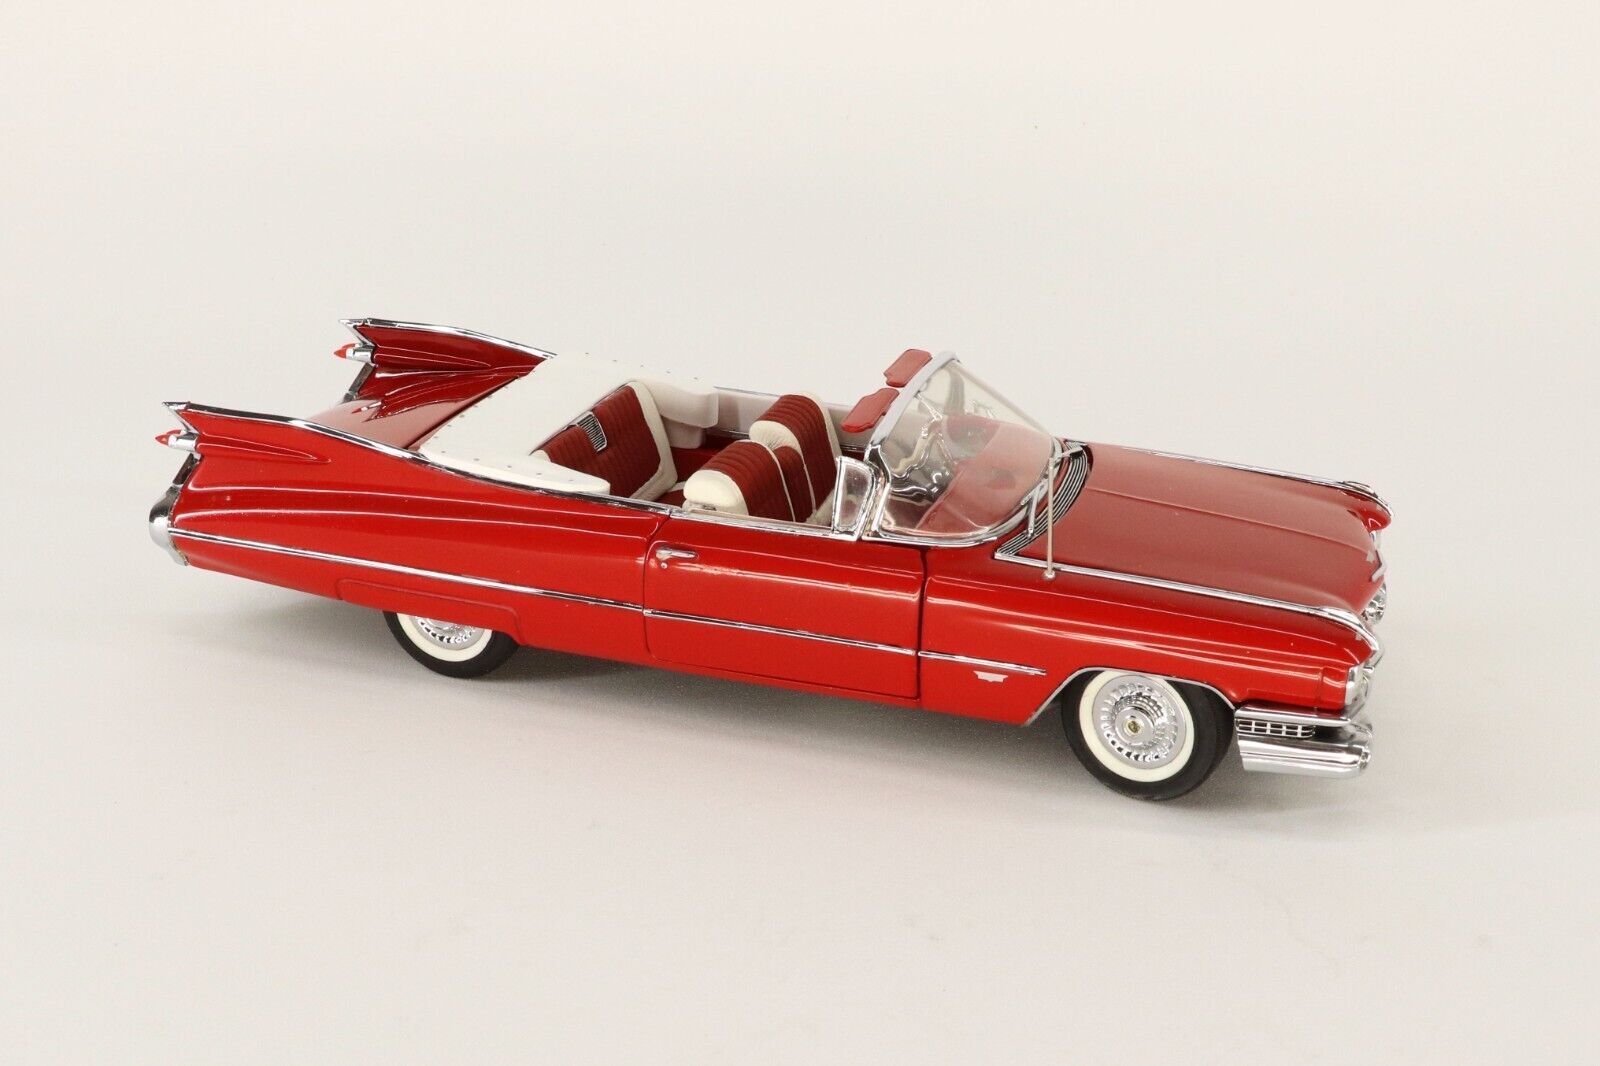 Danbury Mint 1959 Cadillac Series 62 Convertible 1:24 Diecast - Red- Mint In Box